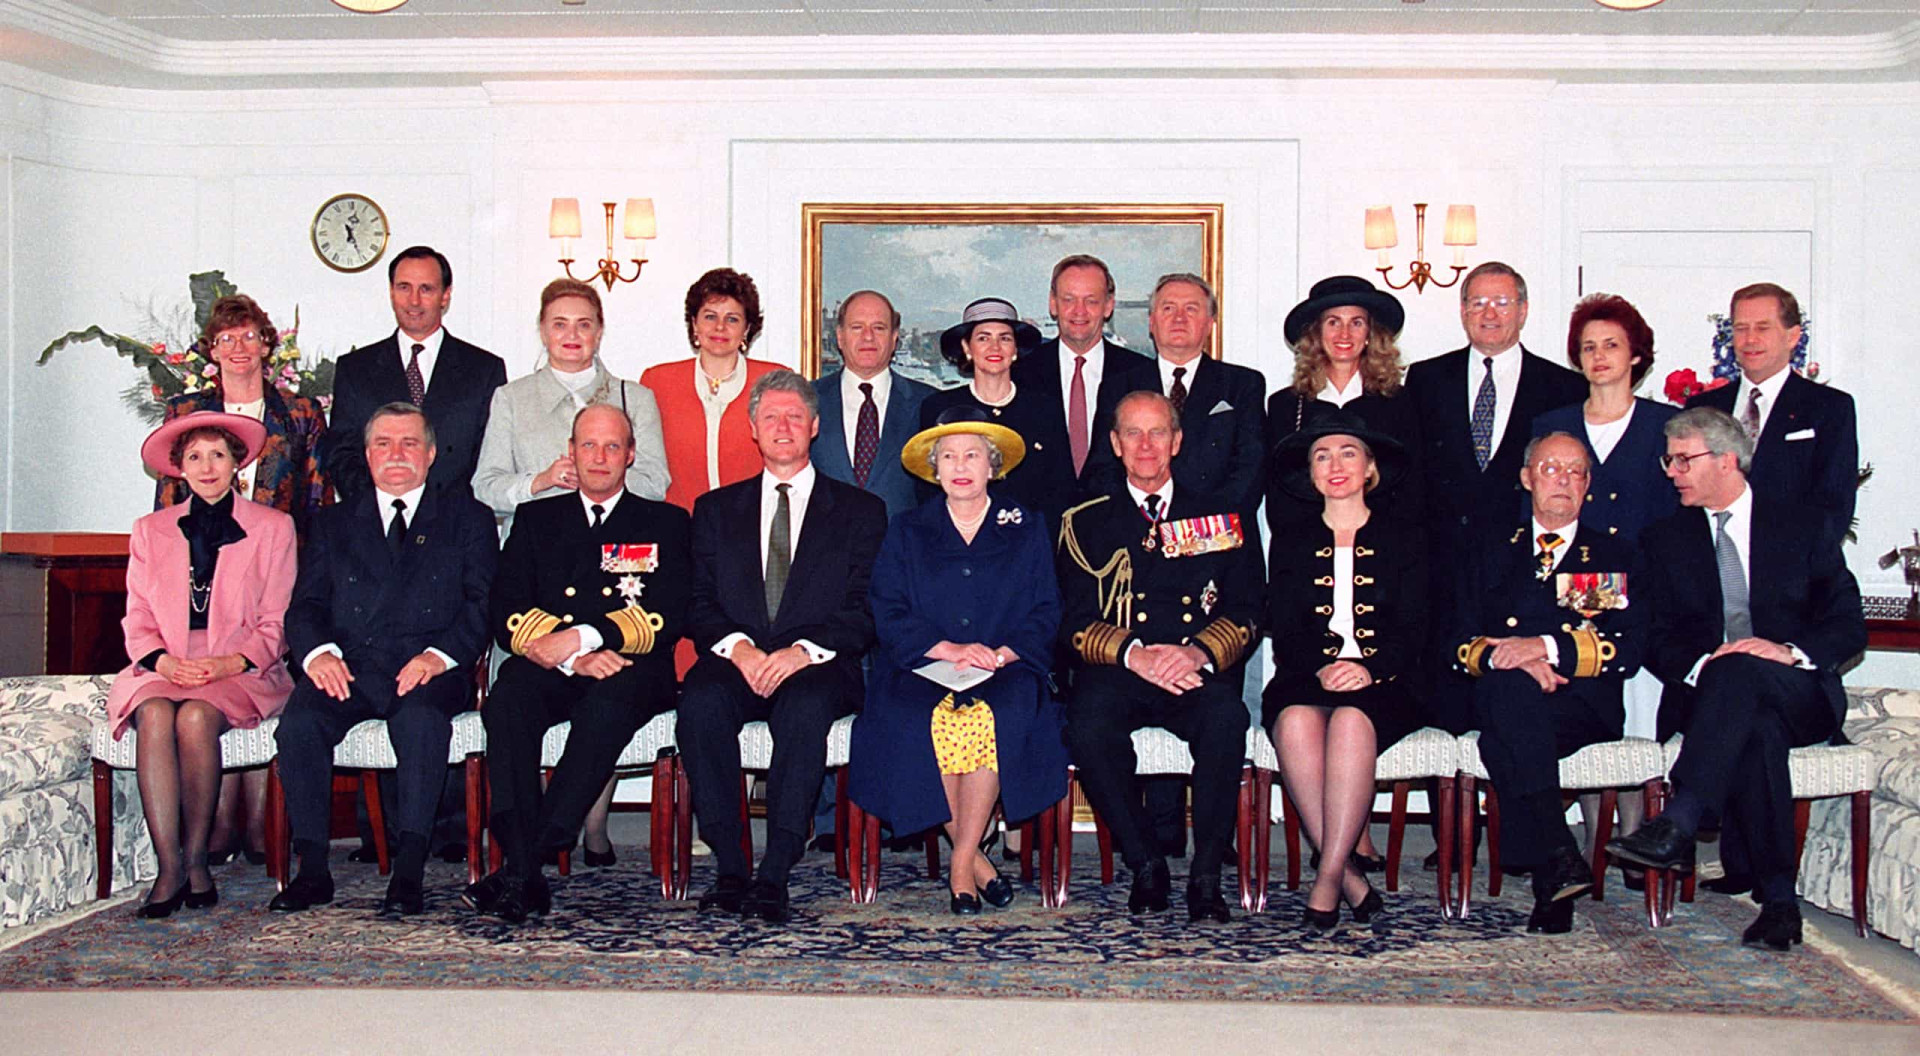 <p>The Queen, Heads of State, and their wives aboard the Royal Yacht <em>Britannia</em> for the D-Day 50th anniversary celebrations, US President Bill Clinton among them. Besides hosting politically- and diplomatically-themed functions, Britannia held numerous "Sea Days"— British overseas trade missions to promote business, trade, and industry around the globe.</p><p><a href="https://www.msn.com/en-us/community/channel/vid-7xx8mnucu55yw63we9va2gwr7uihbxwc68fxqp25x6tg4ftibpra?cvid=94631541bc0f4f89bfd59158d696ad7e">Follow us and access great exclusive content every day</a></p>